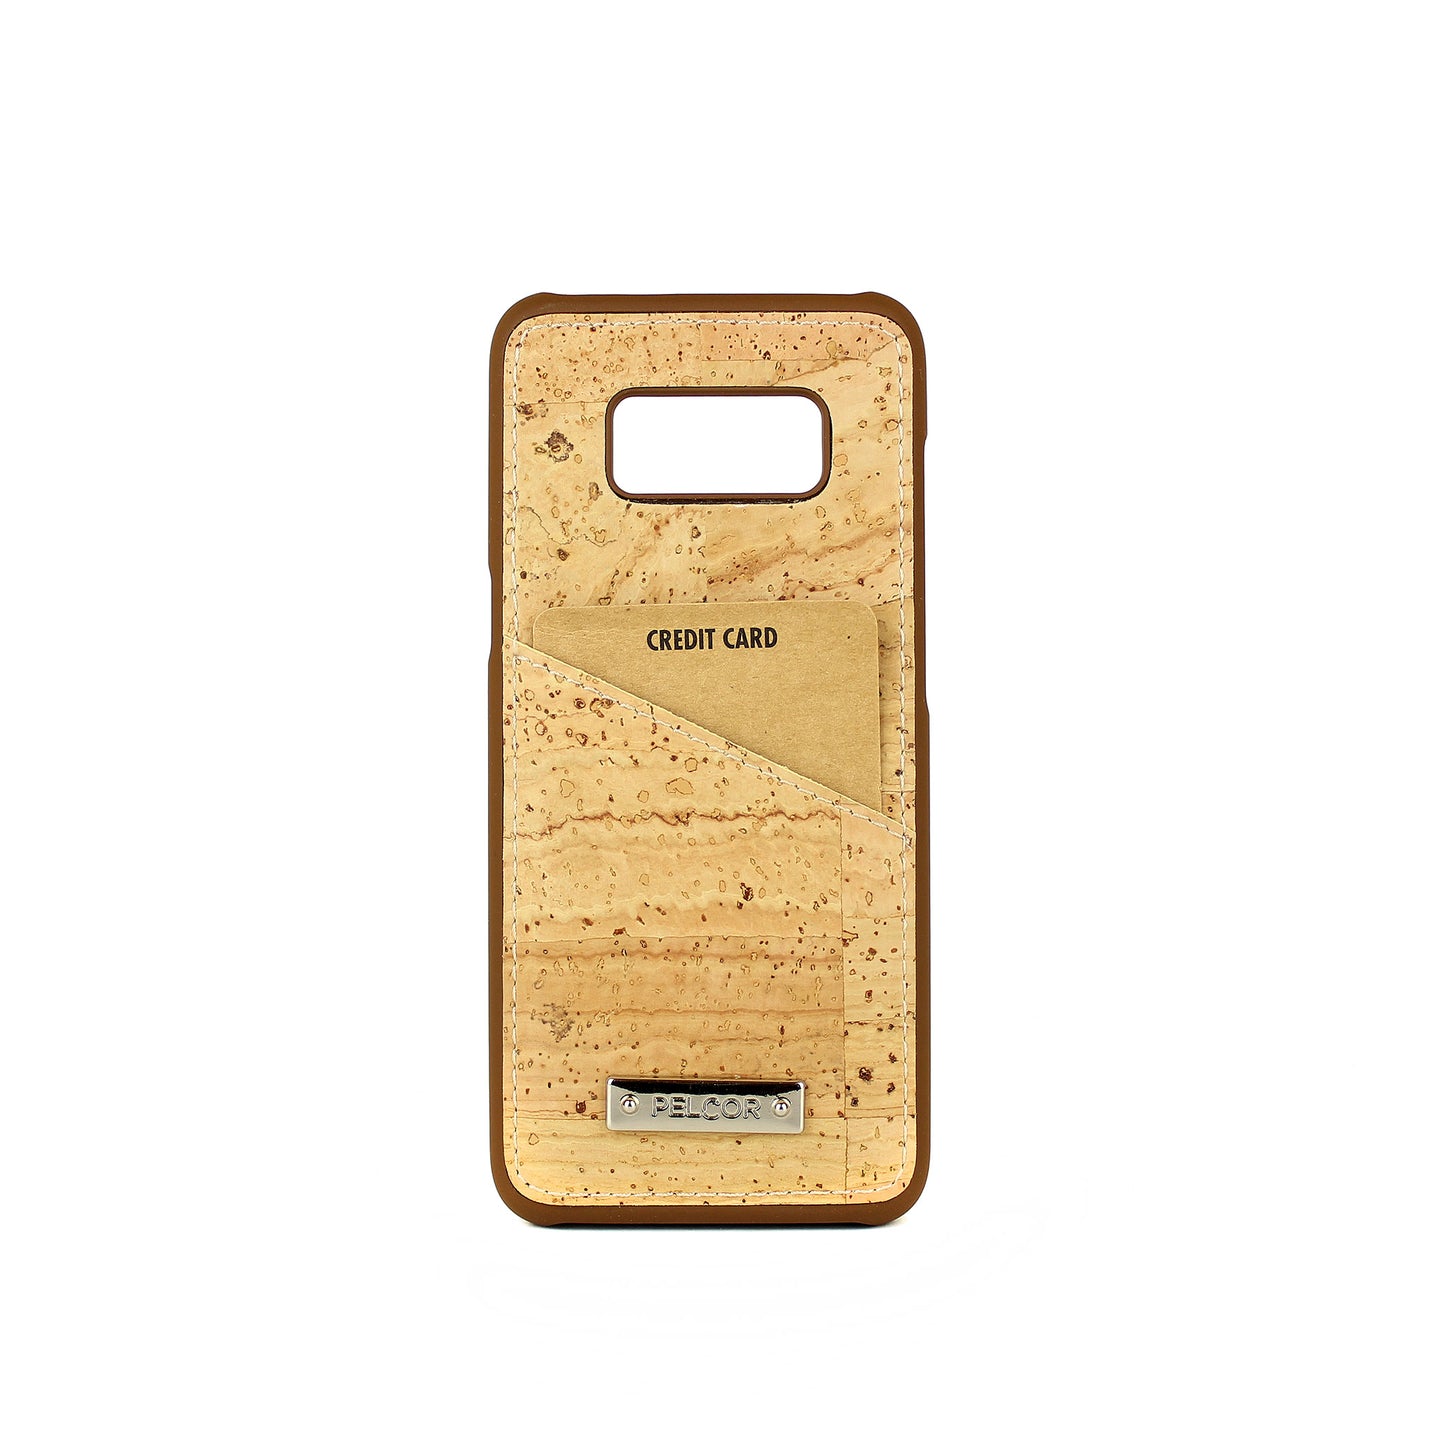 Samsung S8 Mobile Phone Cover